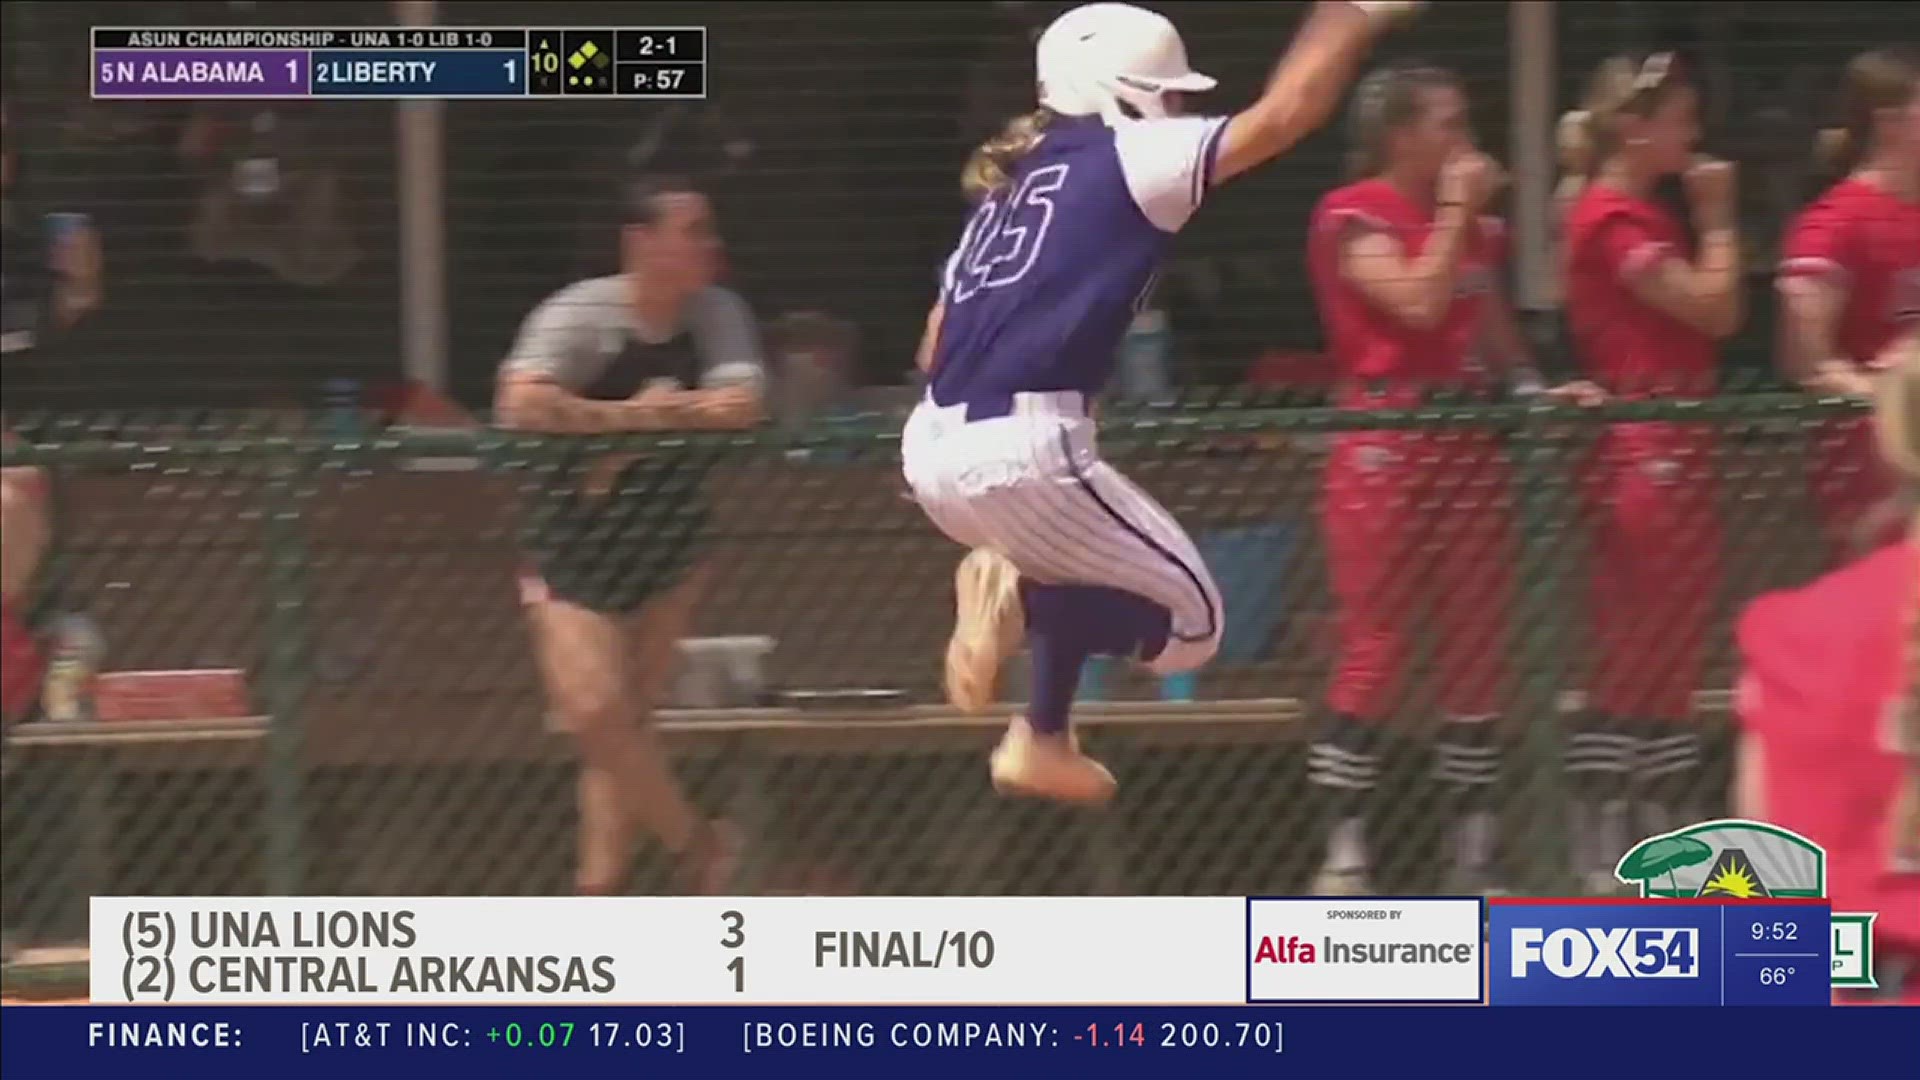 5th-seeded North Alabama reversed its 2022 Championship outcome against 2-seed Liberty to advance into Saturday's ASUN Conference Softball Championship Final.